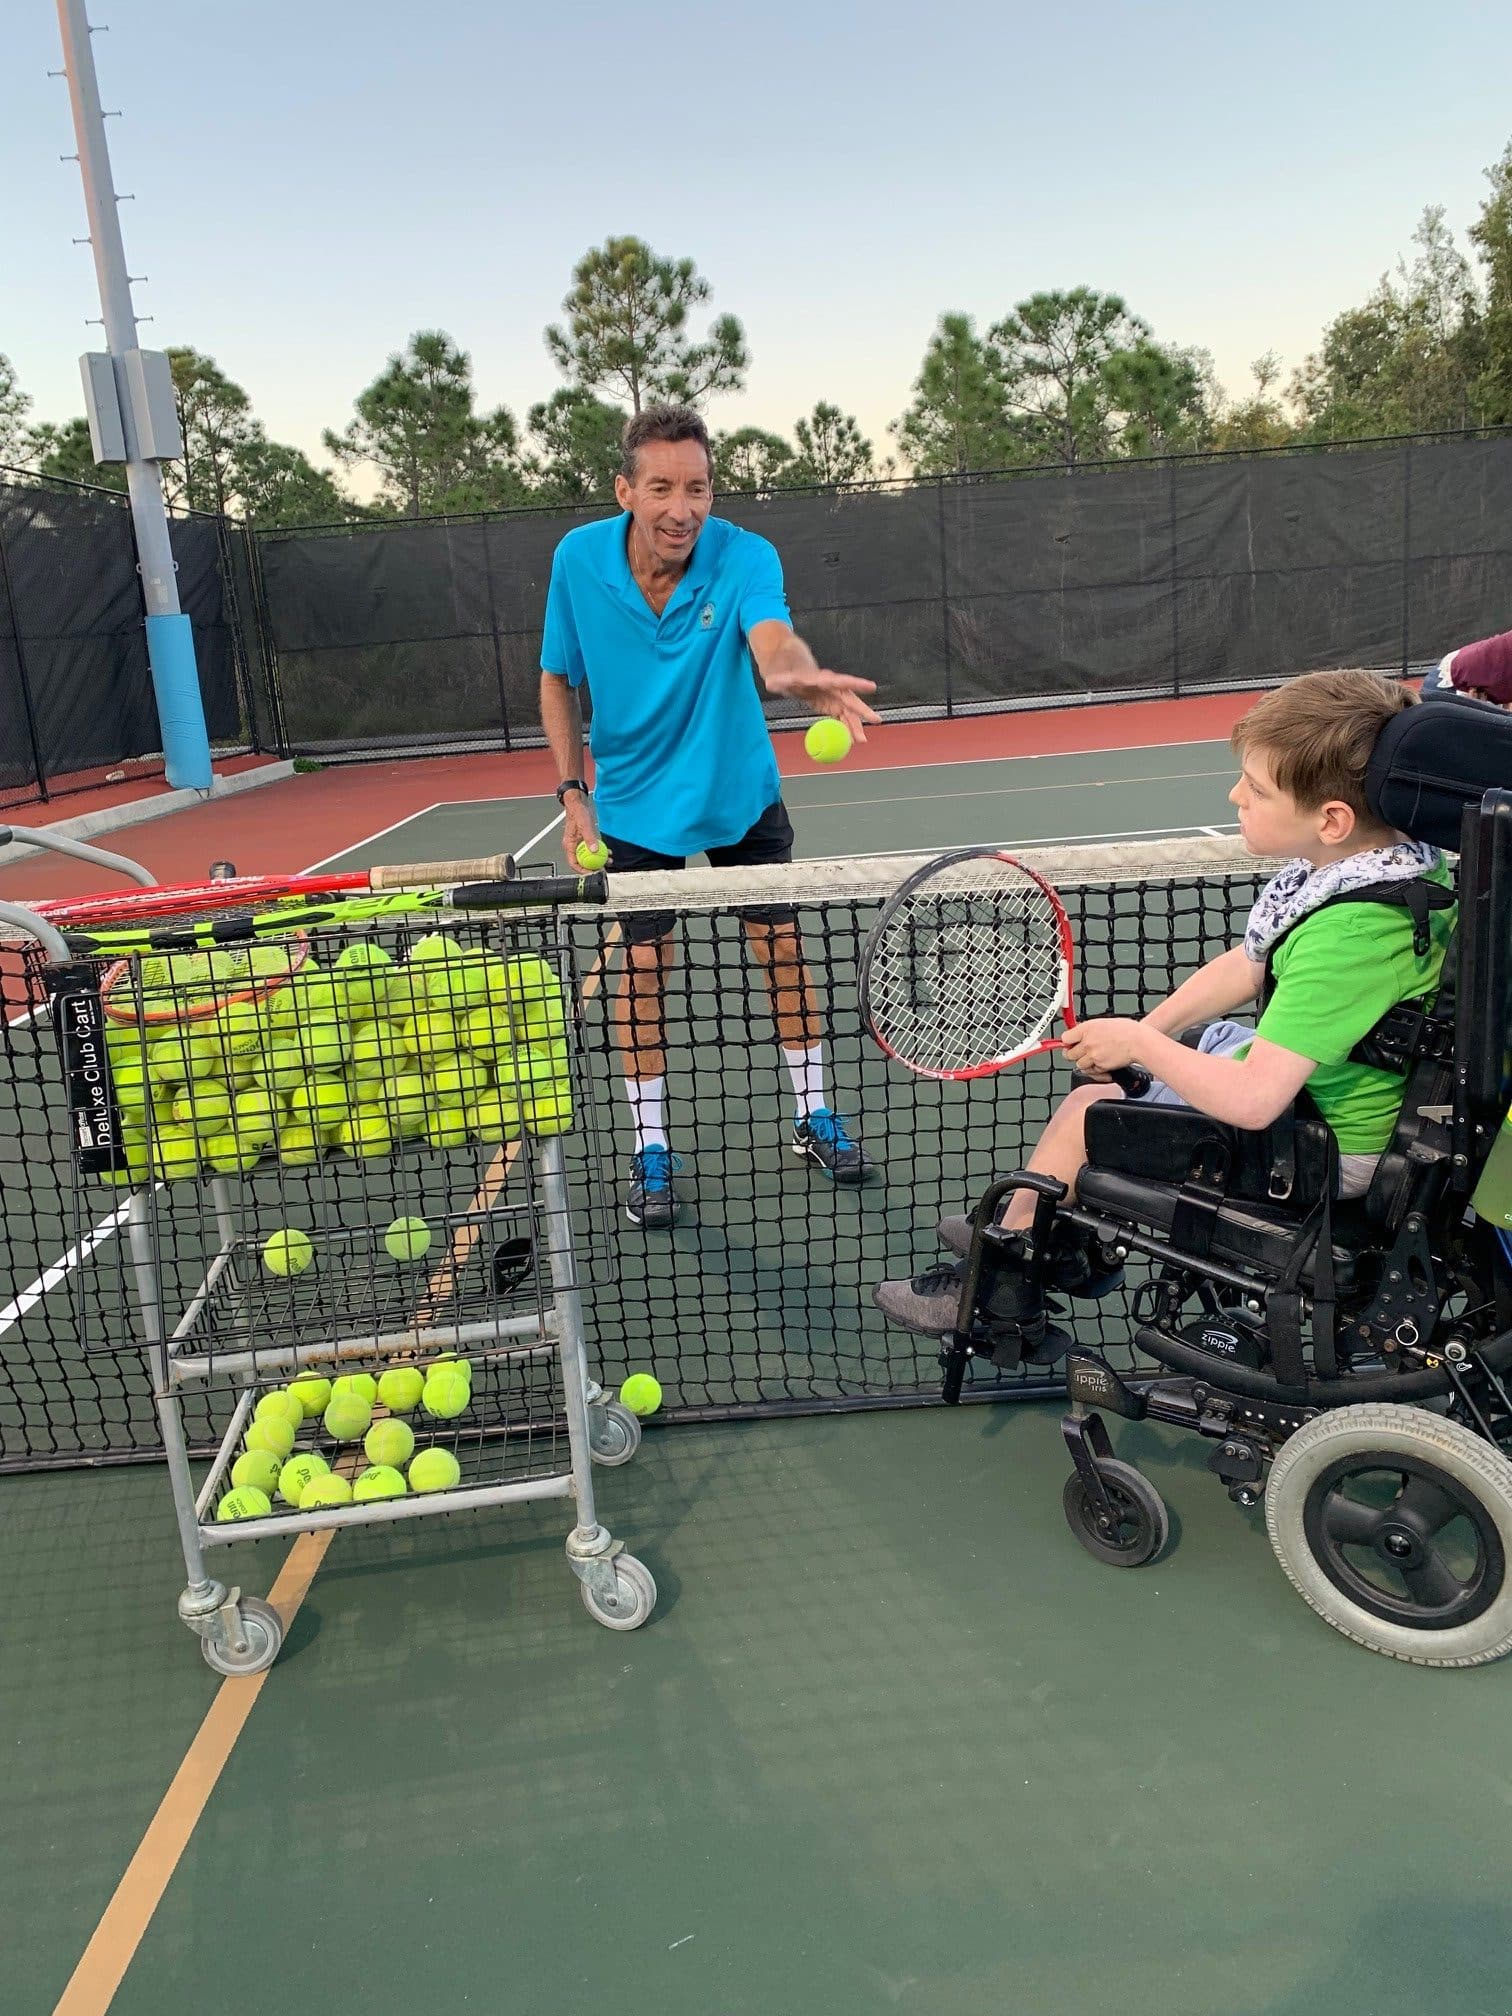 PBG also offers adaptive and wheelchair tennis programs.